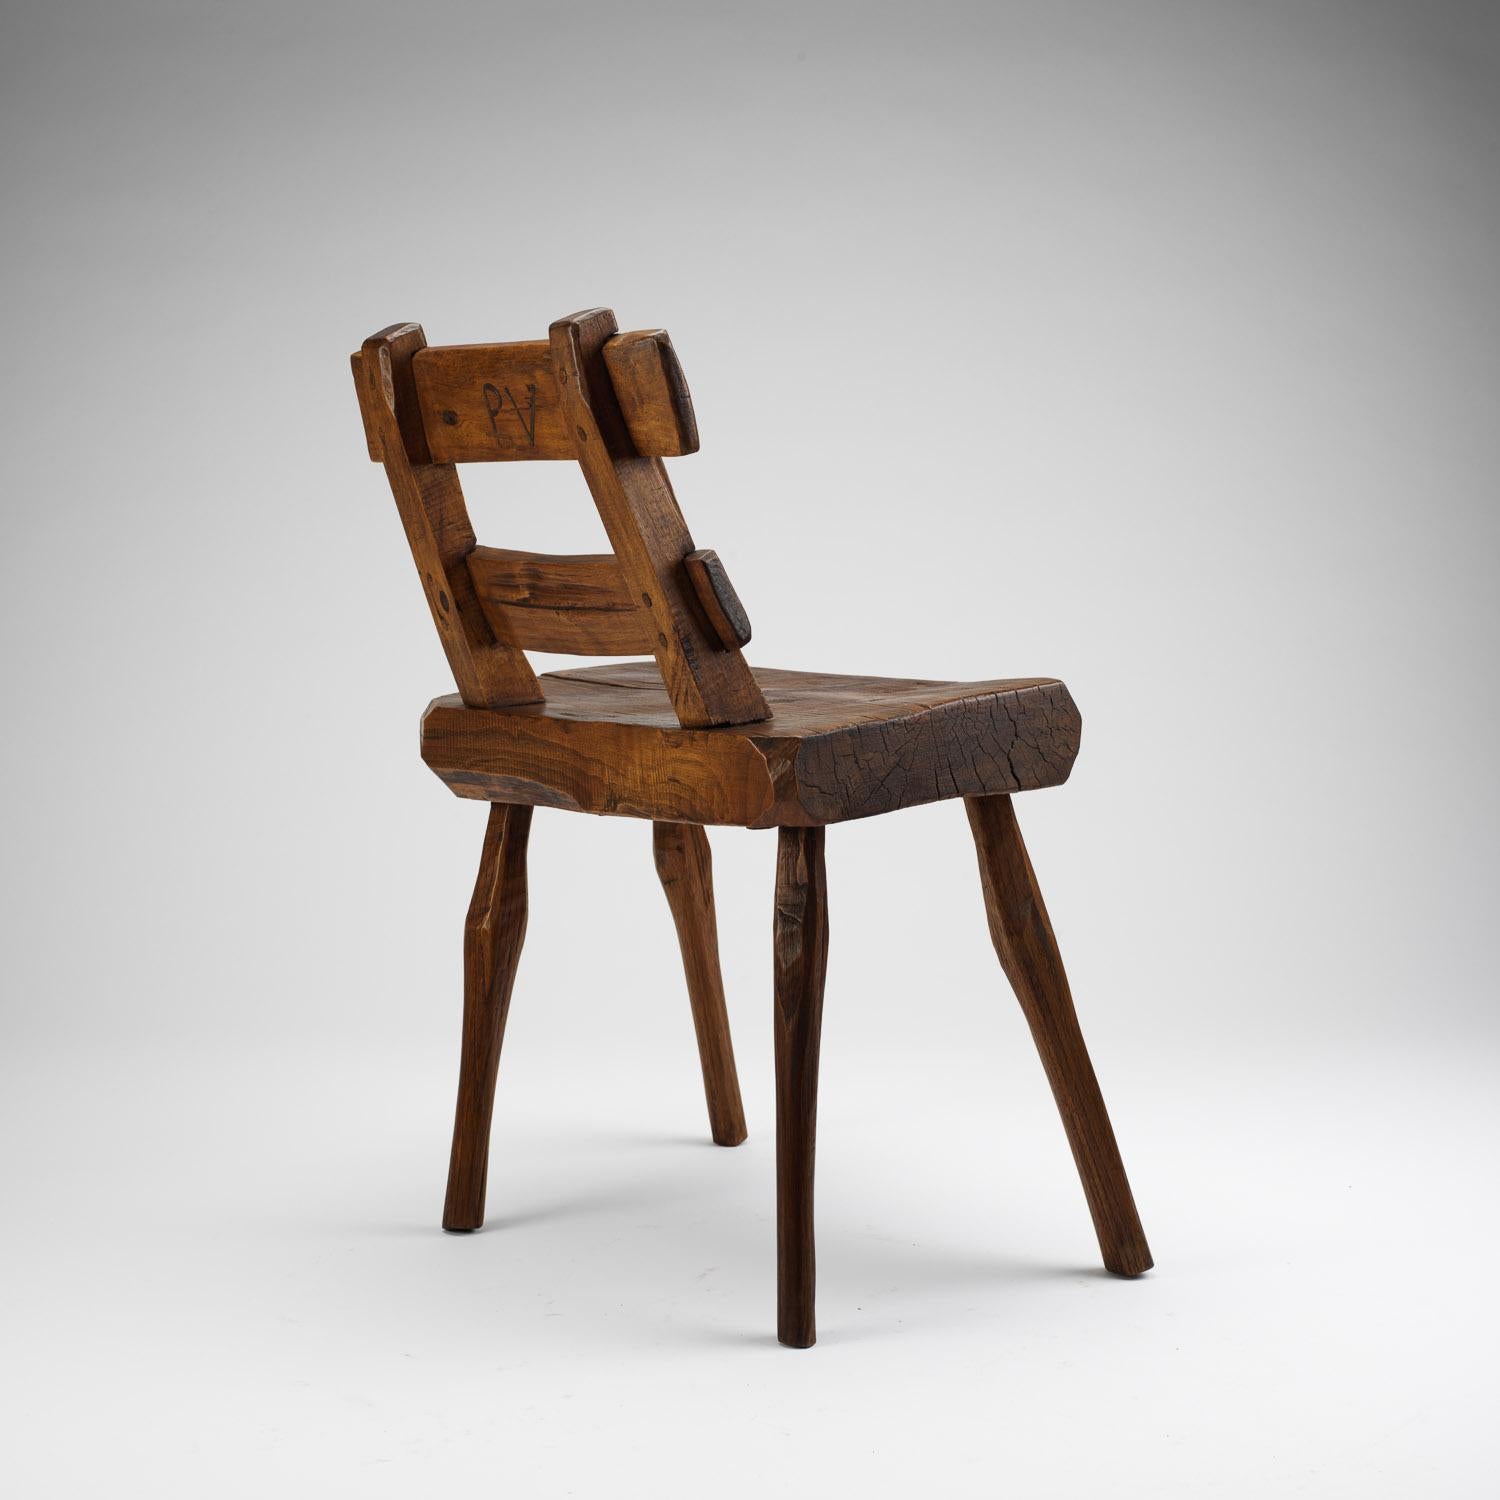 French Primitive Ladder-Back Alpine Chair, France, Early 1900s